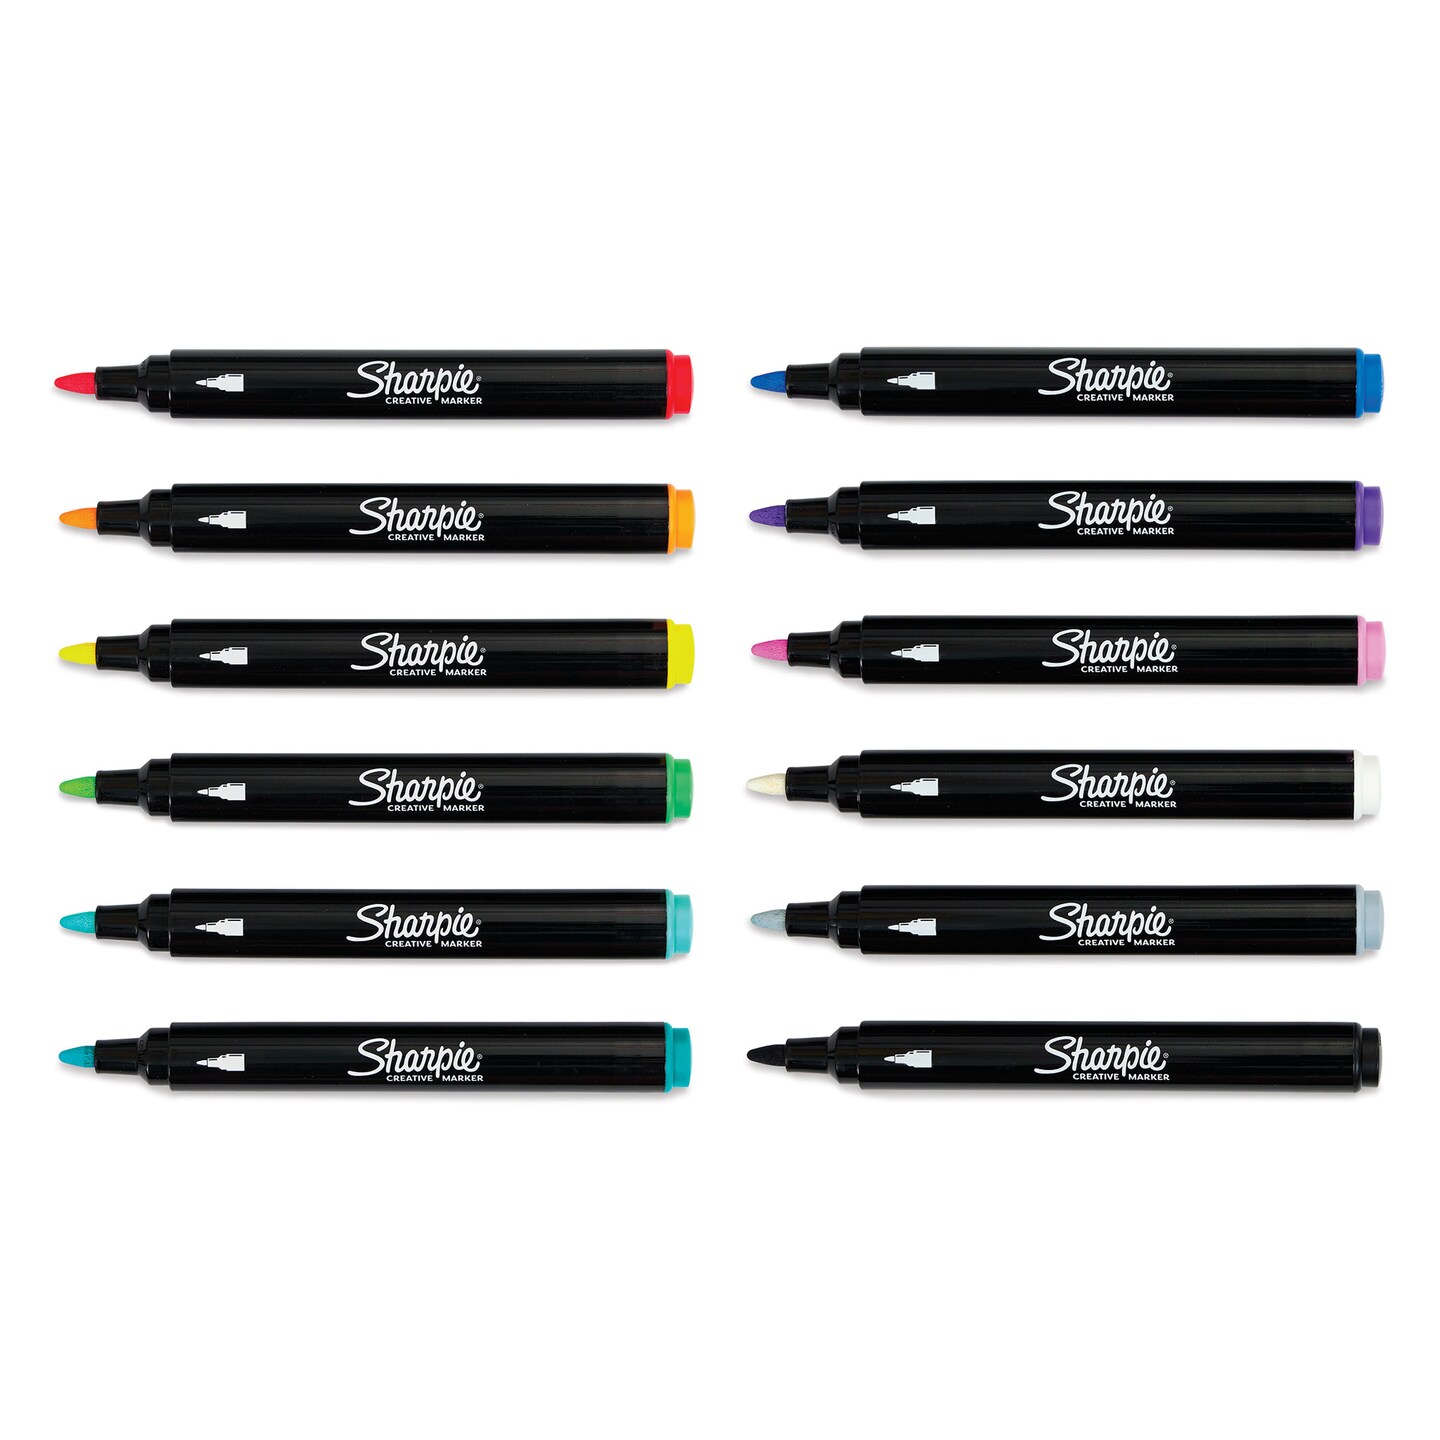 Sharpie Creative Acrylic Markers - Bullet Tip, Set of 12